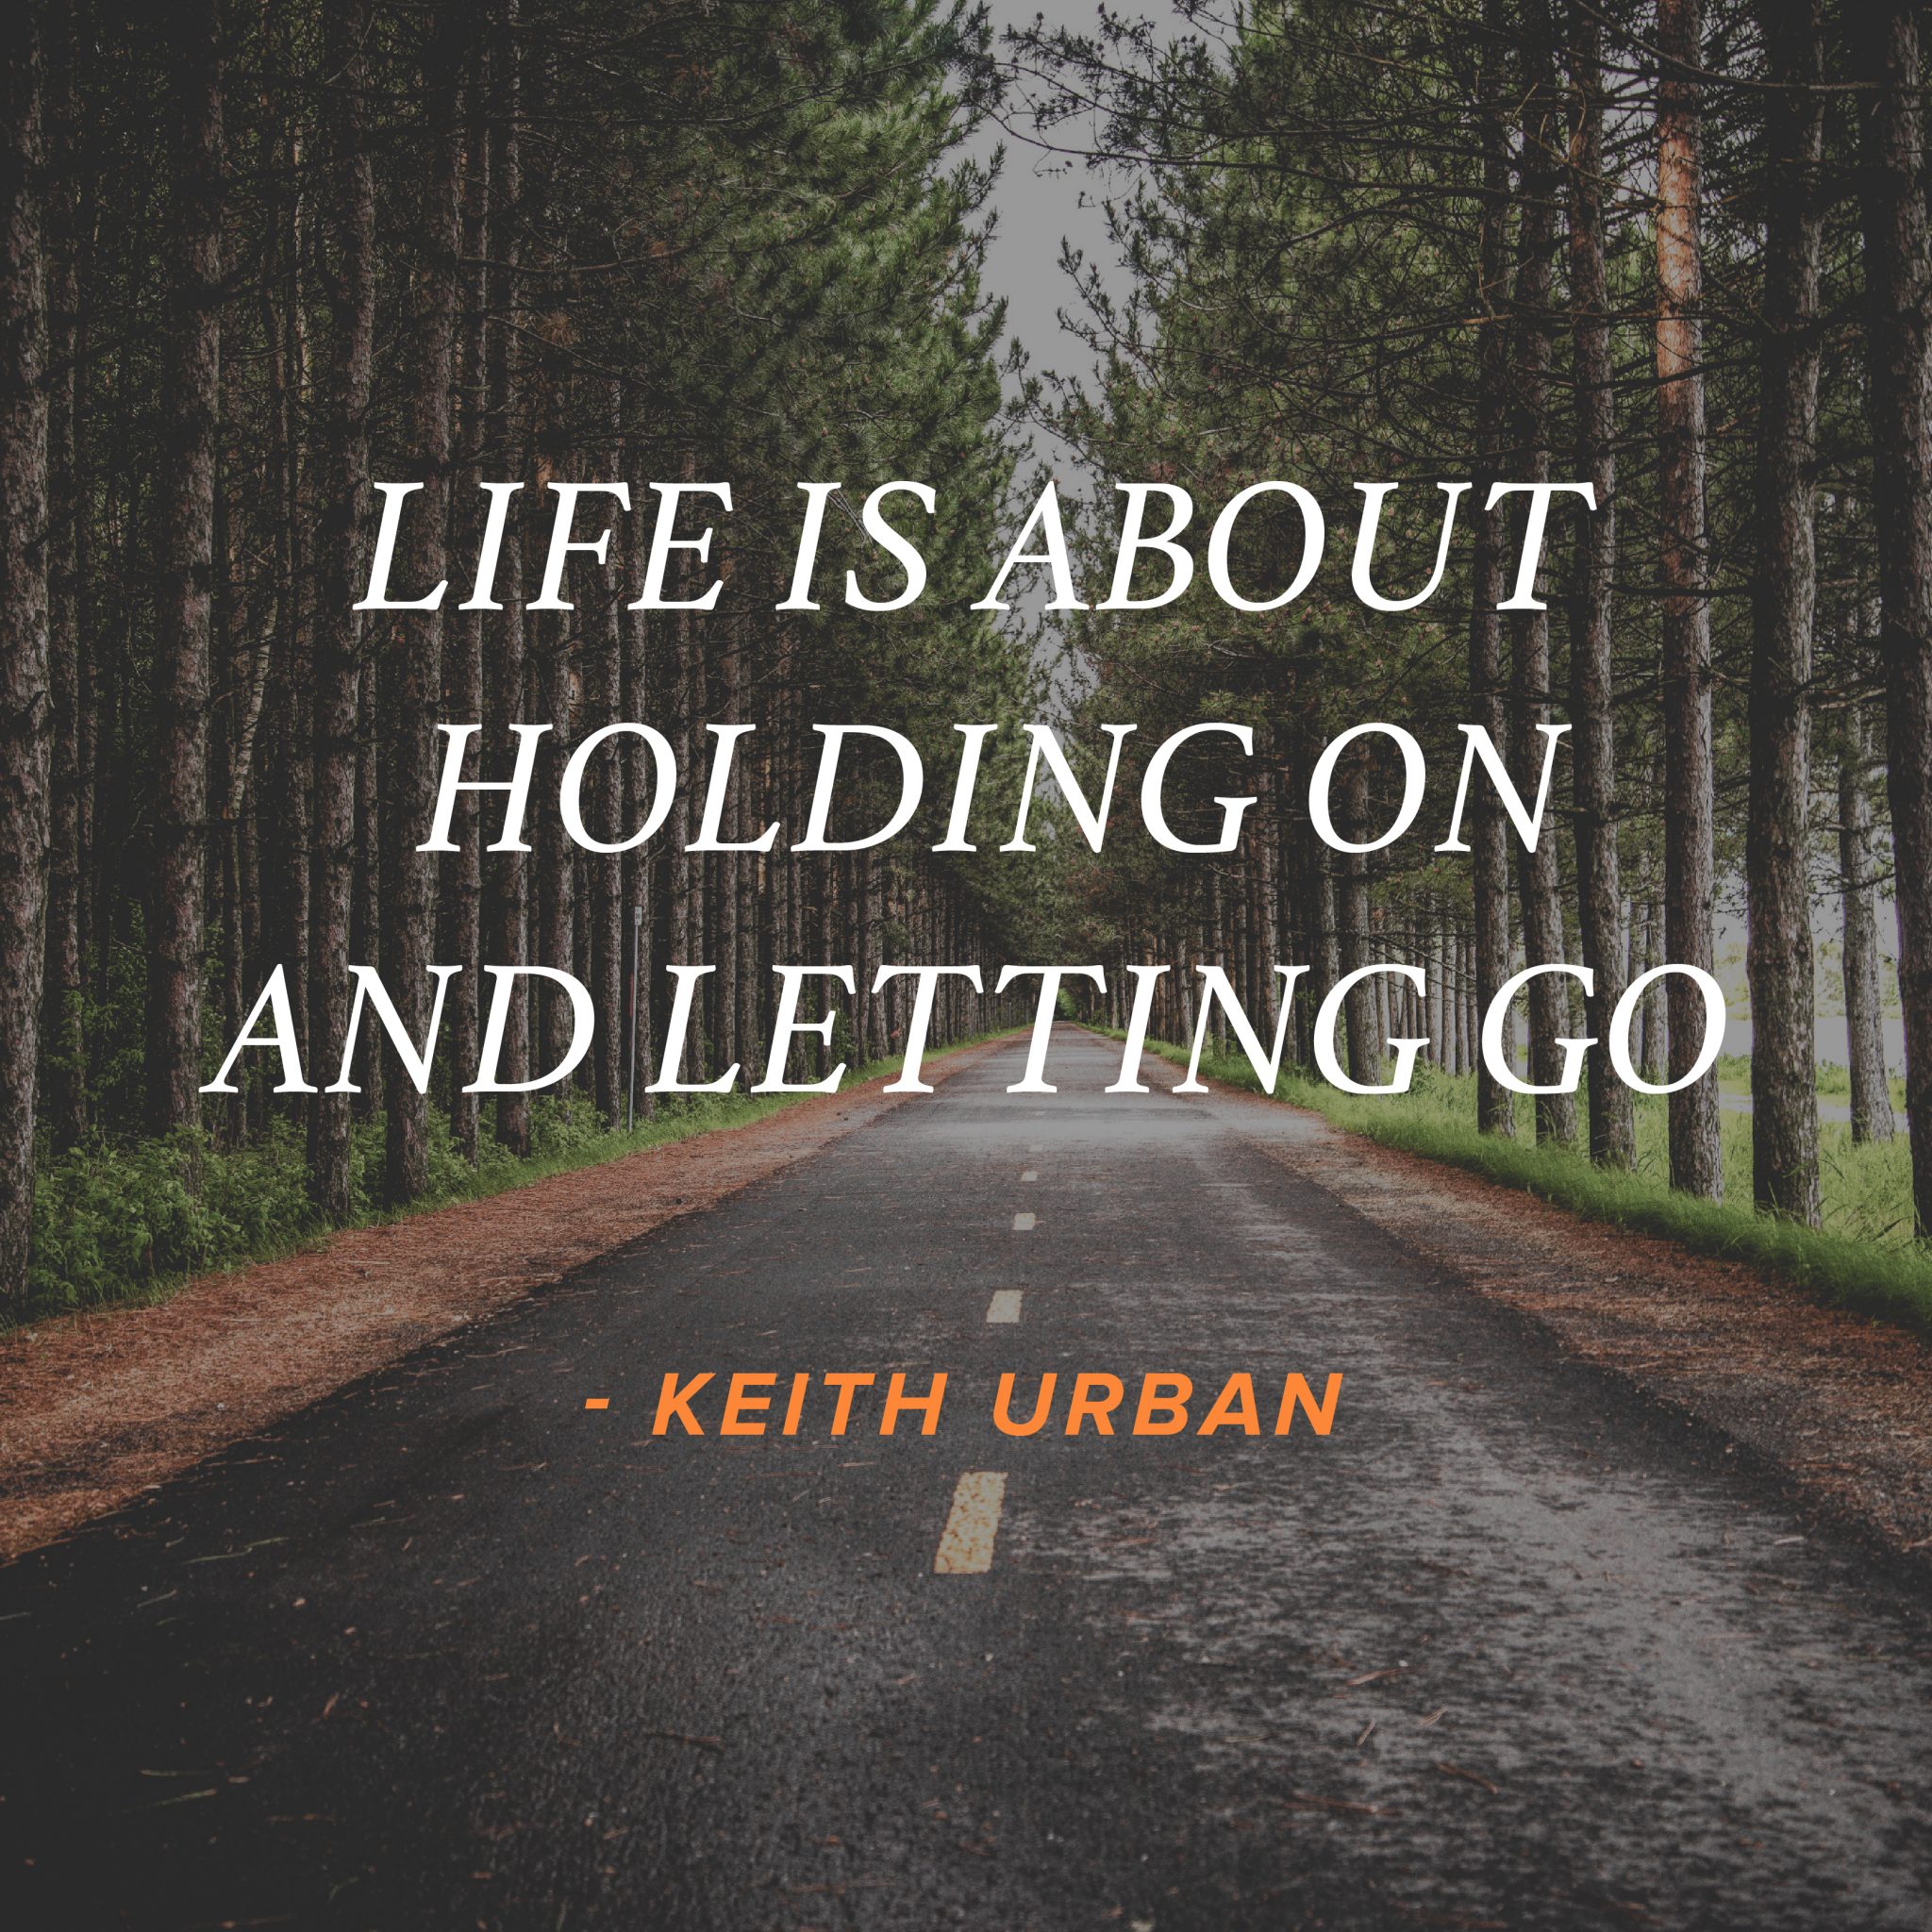 keith urban - life is about holding on and letting go